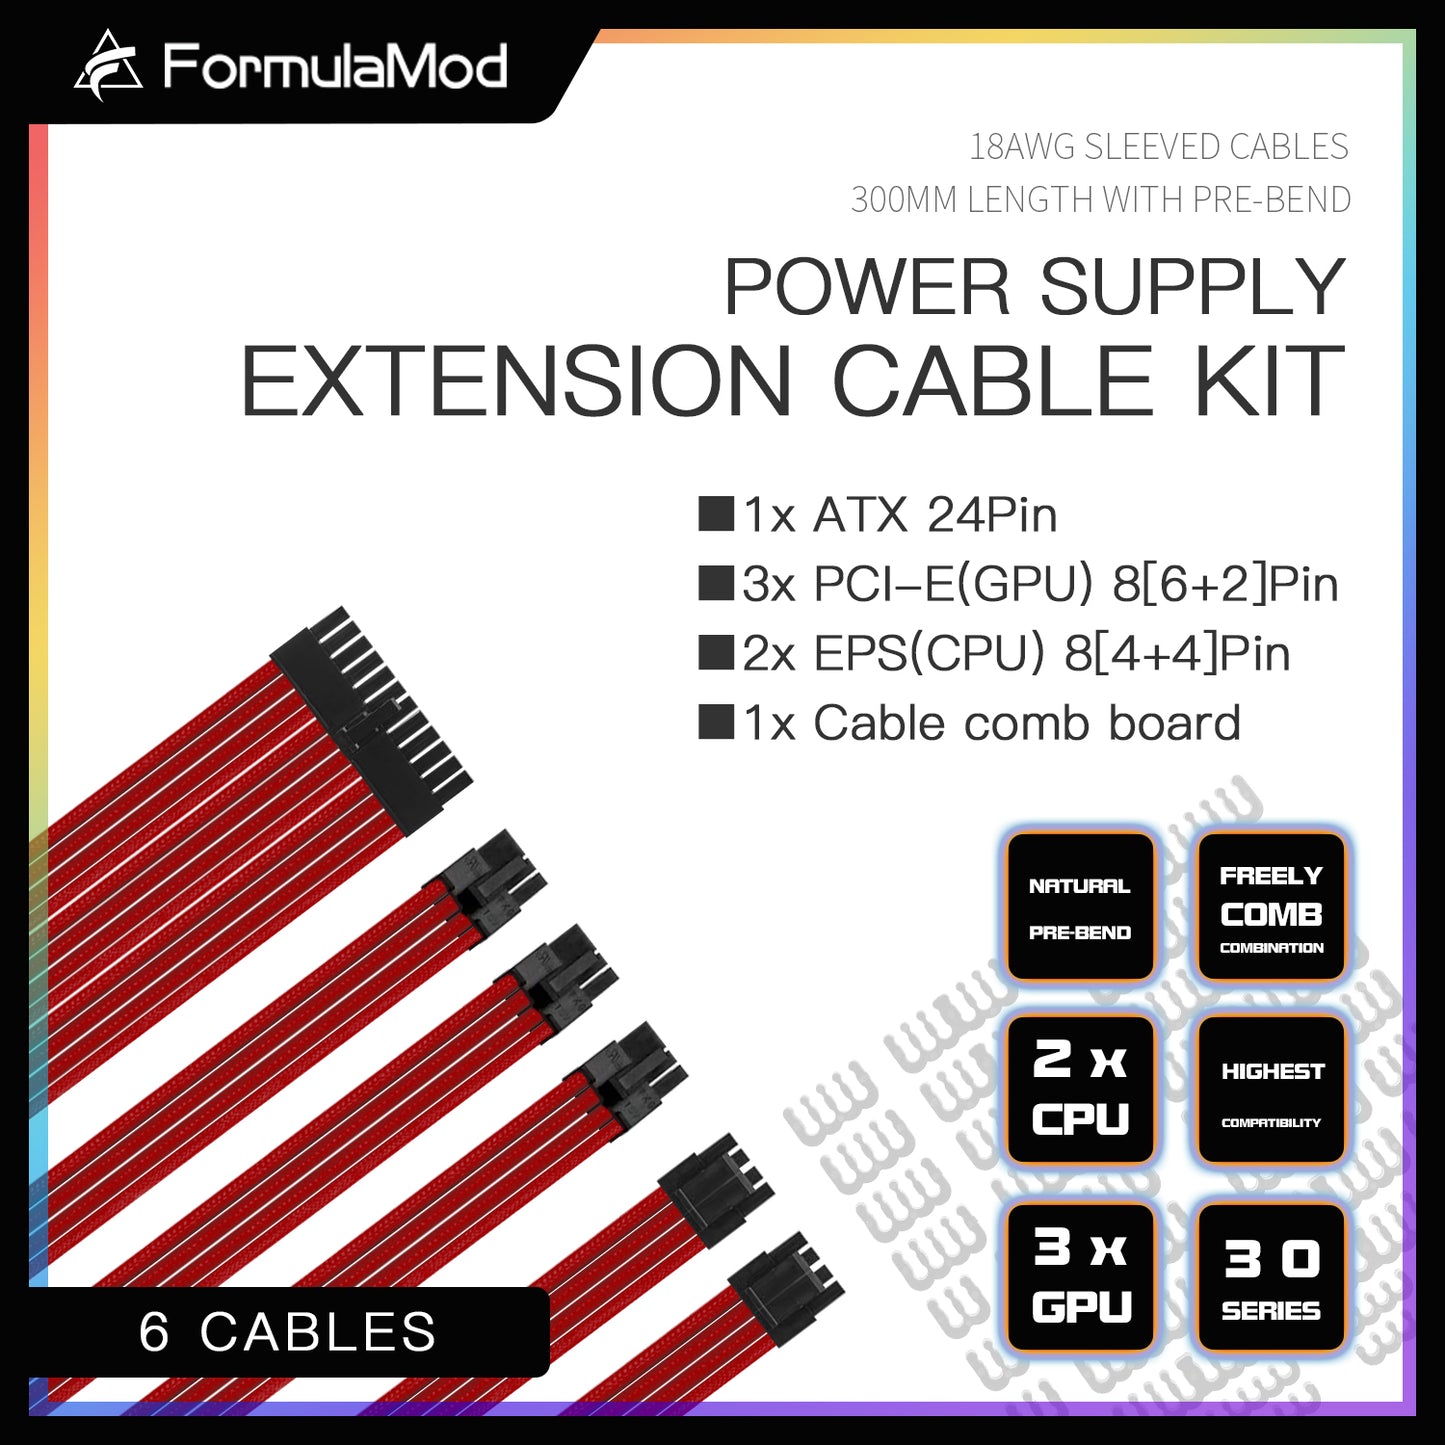 FormulaMod Advanced PSU Extension Cable Kit, Sleeved PSU Cable Combo, 300mm High Compatibility With Combs, ATX 24Pin / PCI-E GPU 8Pin / EPS CPU 8Pin, Fm-NCK1-I